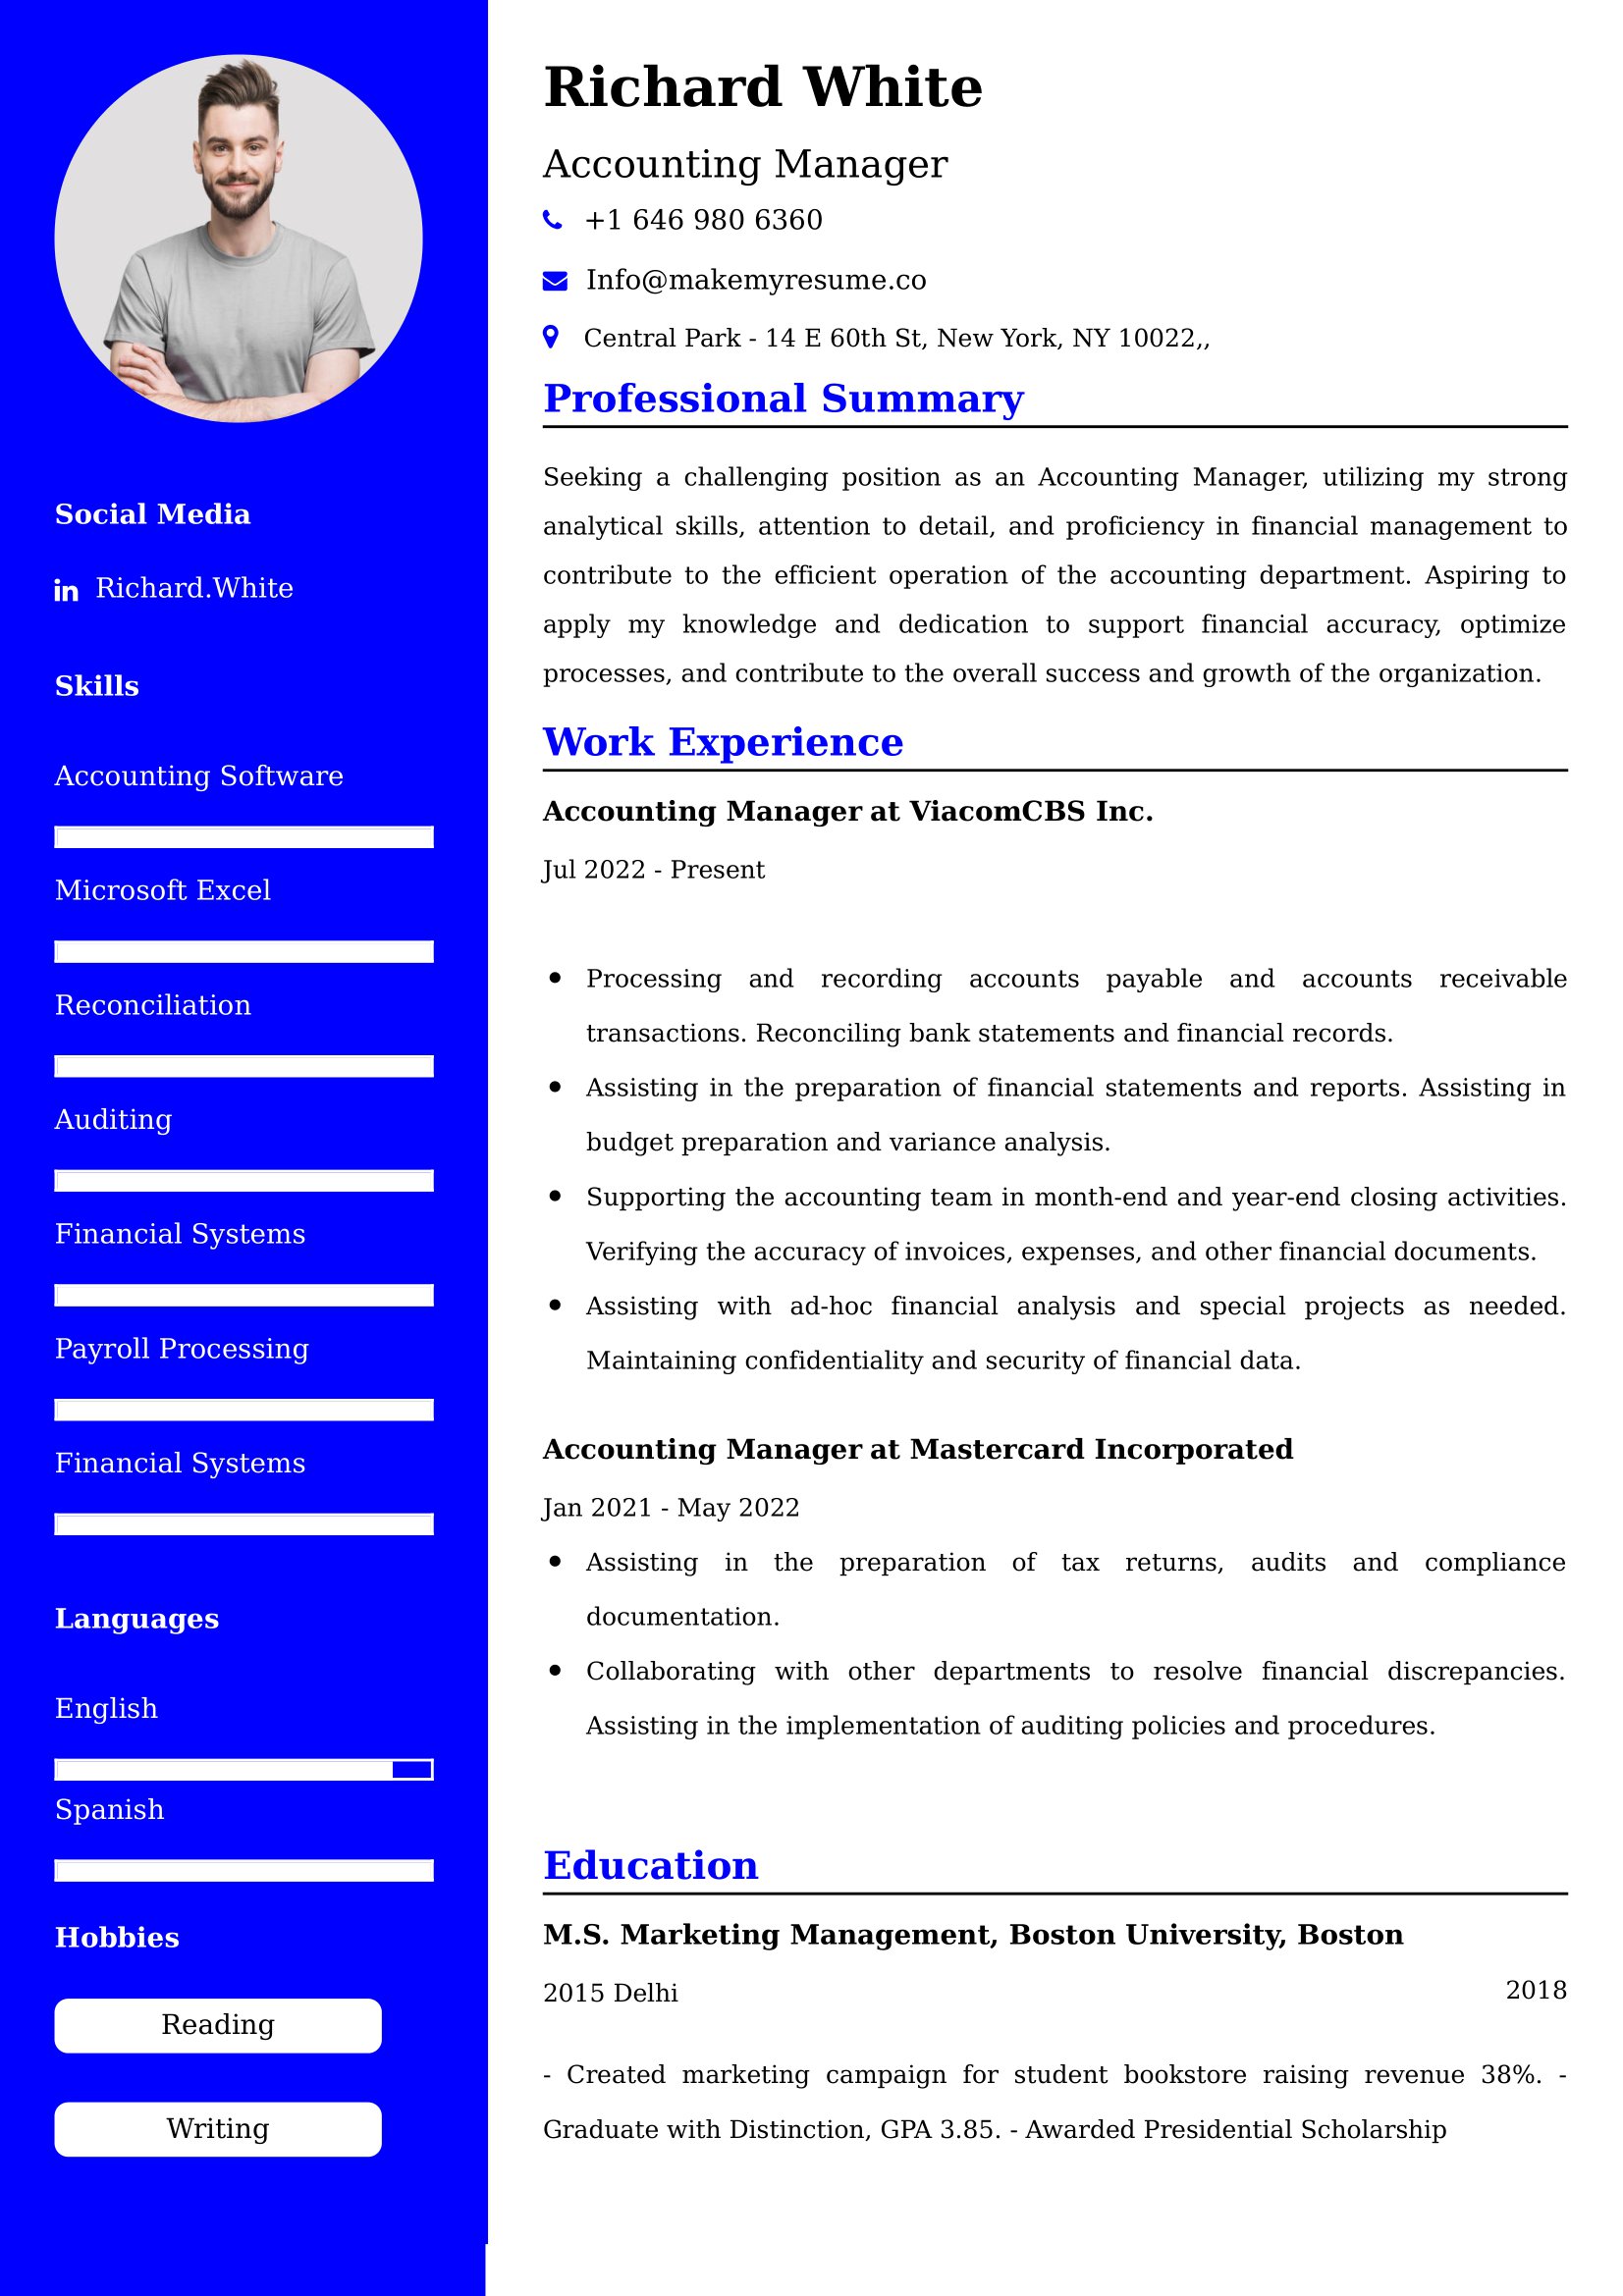 Accounting Manager Resume Examples - UK Format, Latest Template.